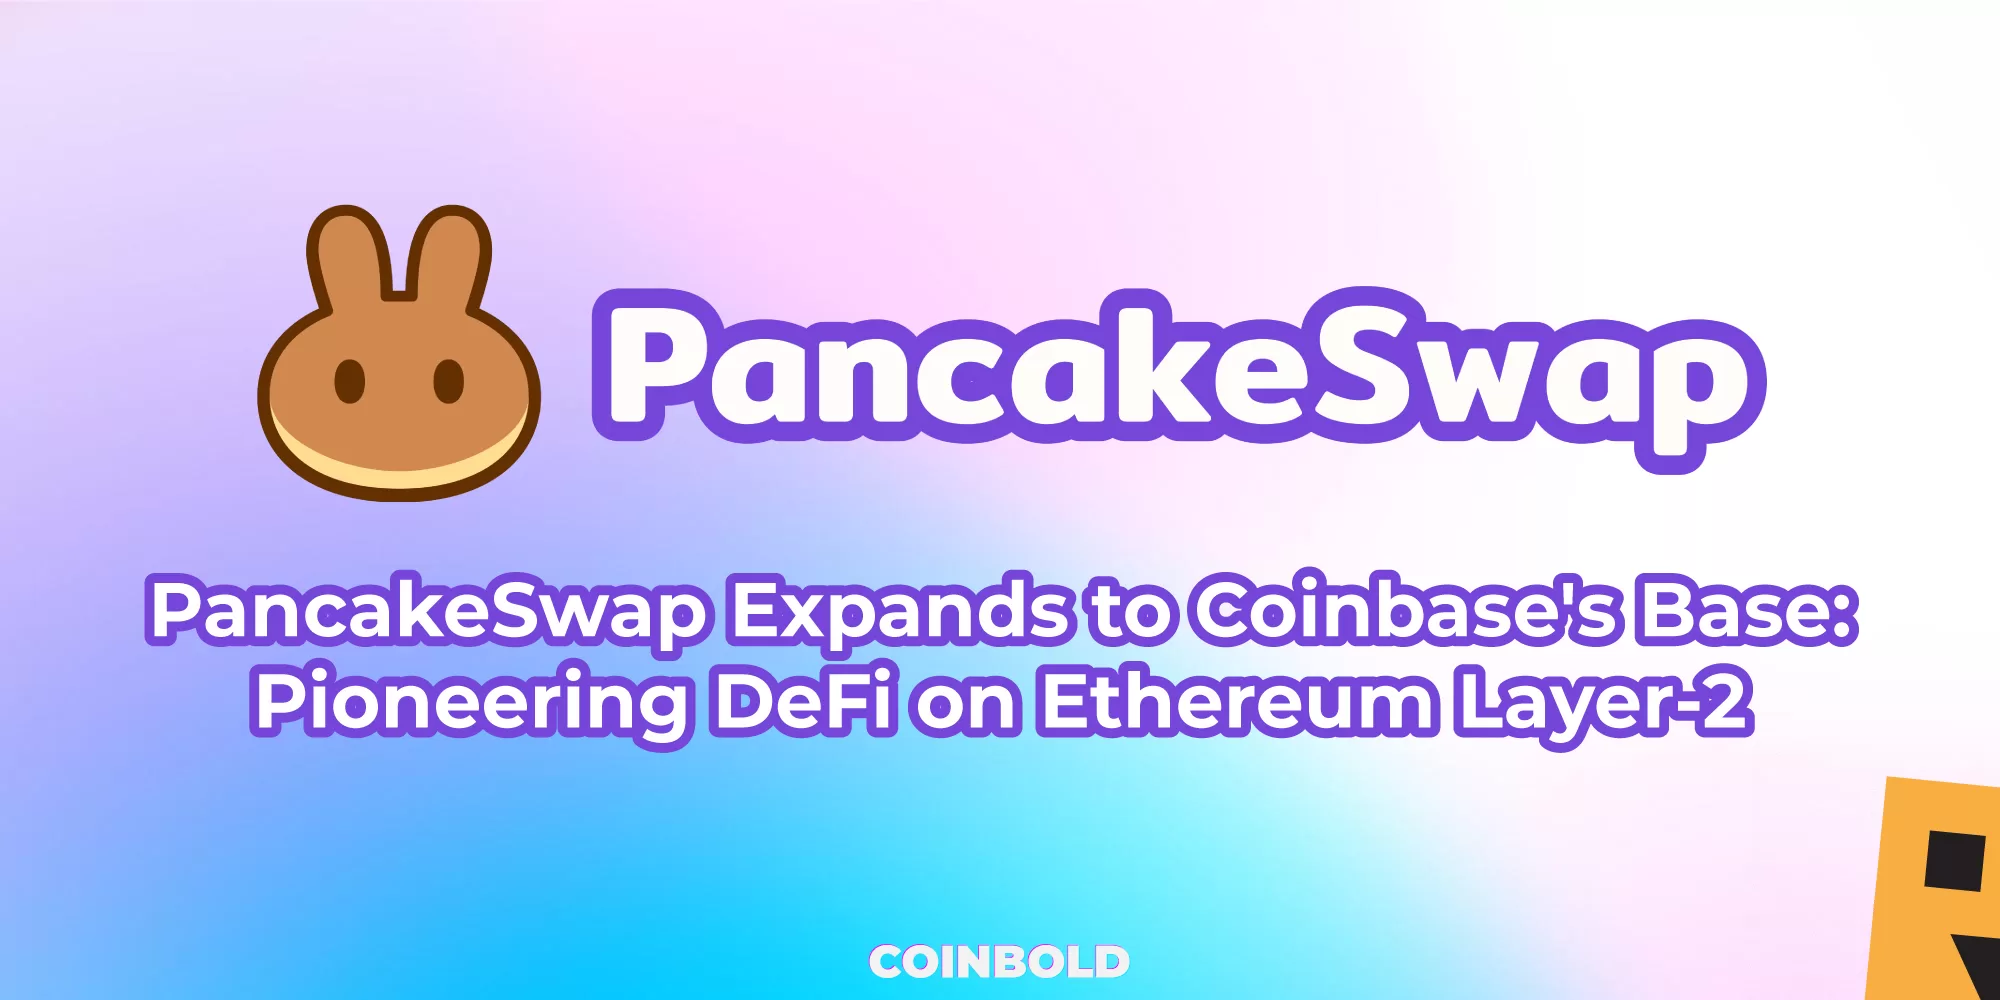 PancakeSwap Expands to Coinbase's Base Pioneering DeFi on Ethereum Layer 2